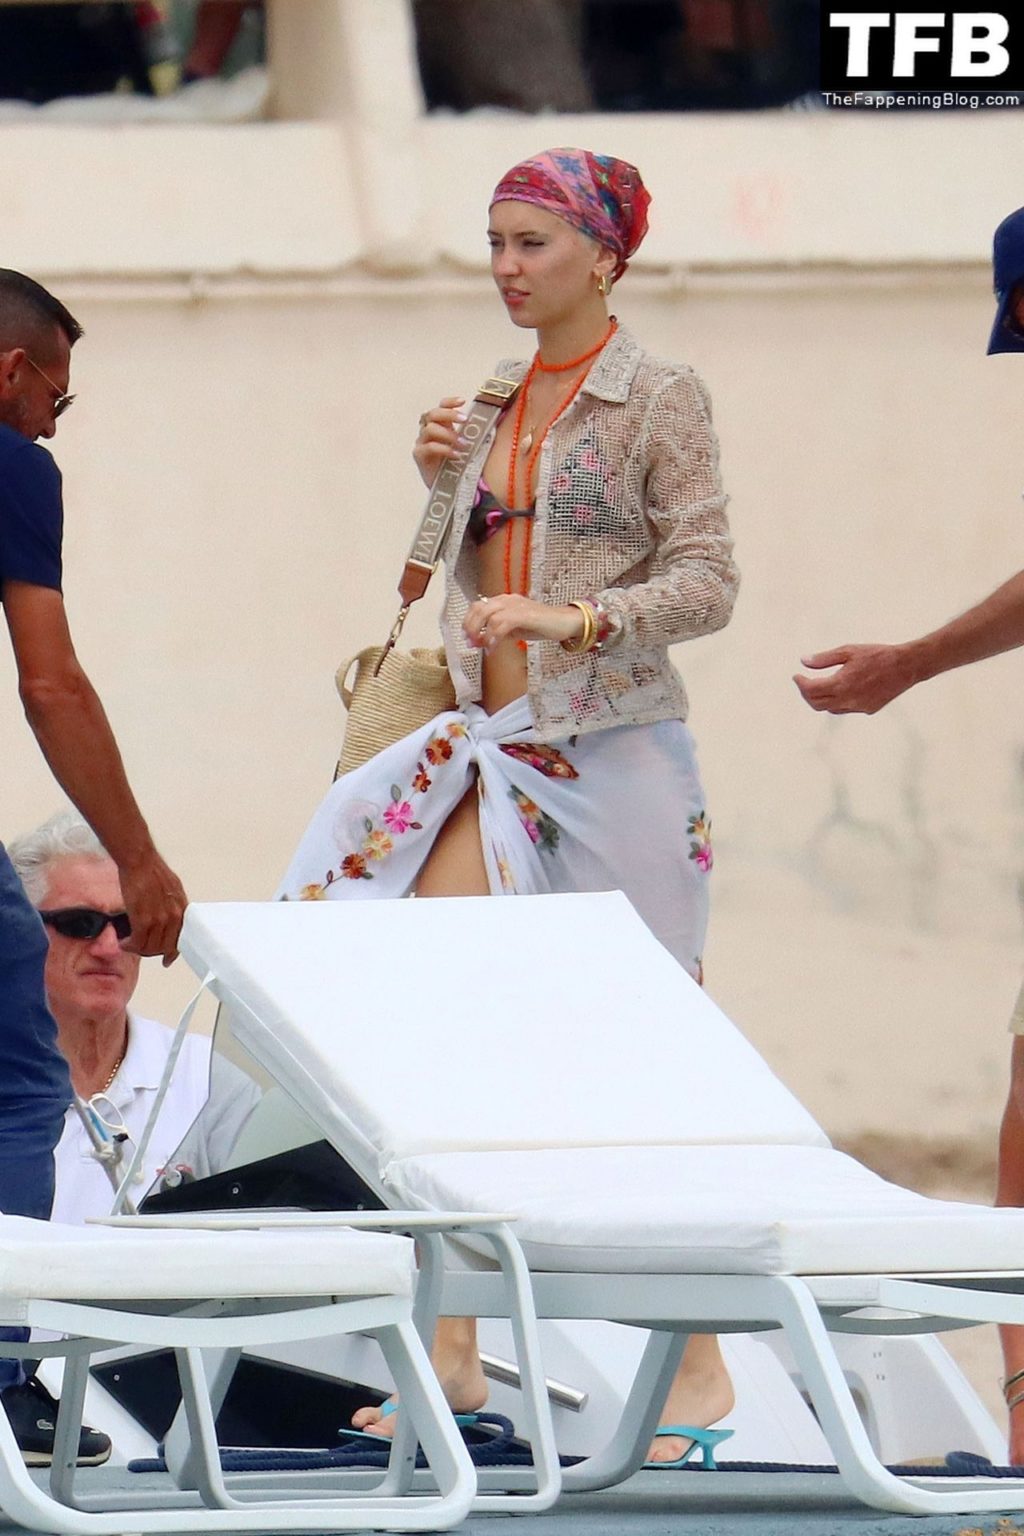 Iris Law is Pictured Posing for Selfies and Having Fun on a Boat (26 Photos)